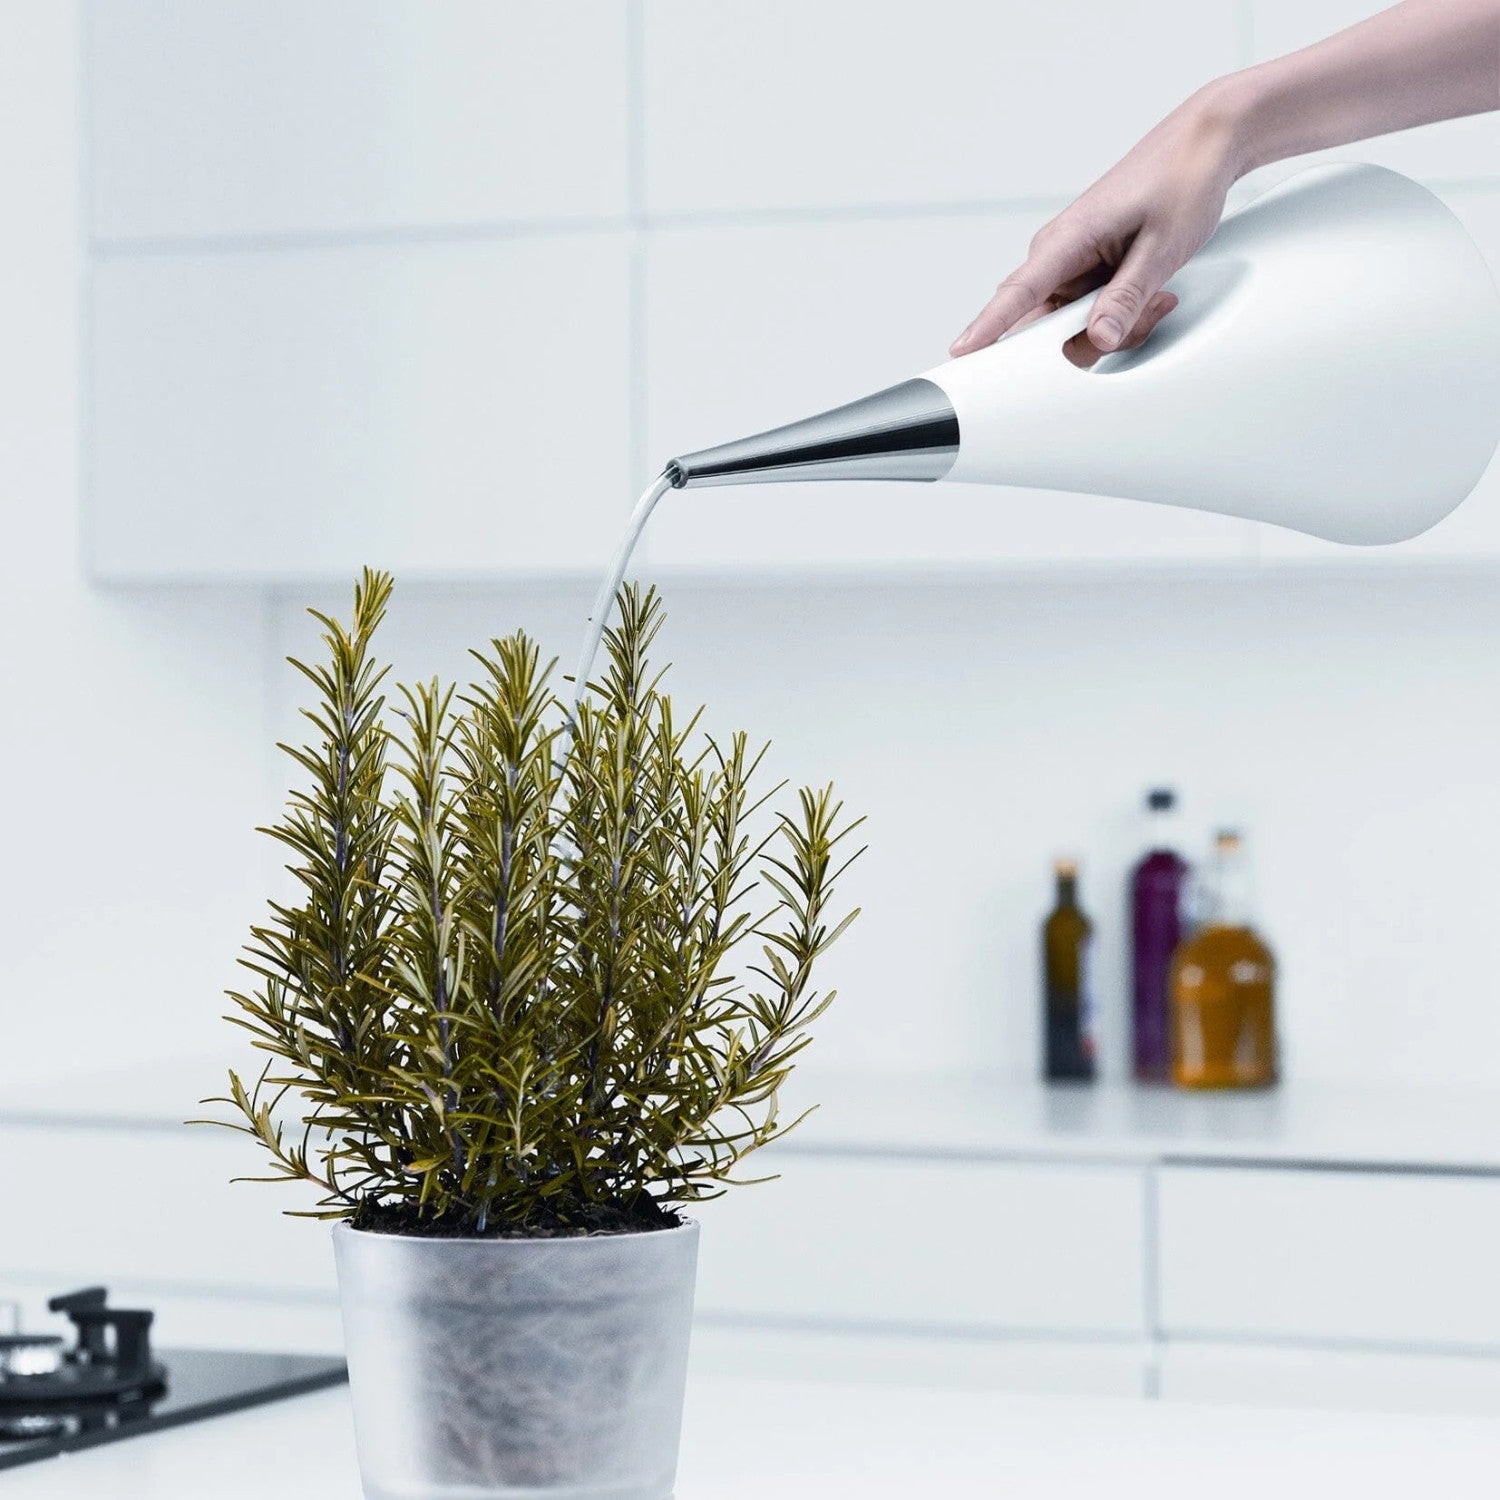 Eva Solo watering can used on plant